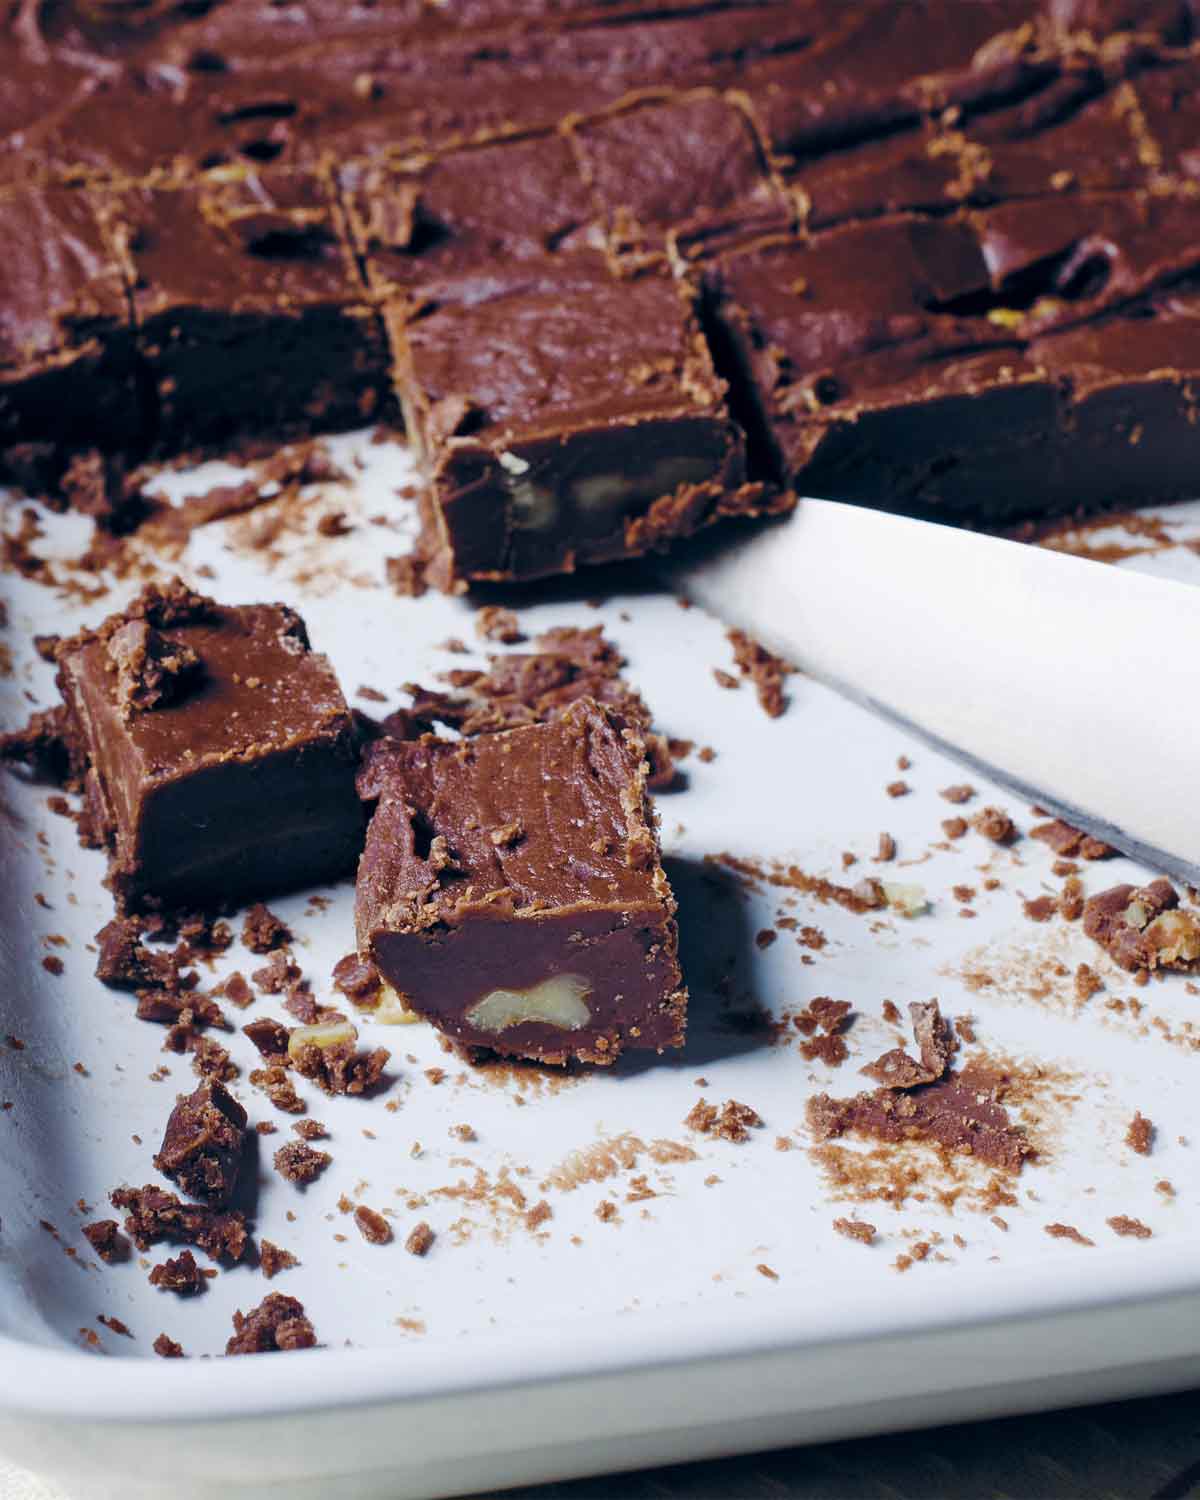 Squares of chocolate fudge on a rimmed baking sheet with a knife resting beside them.